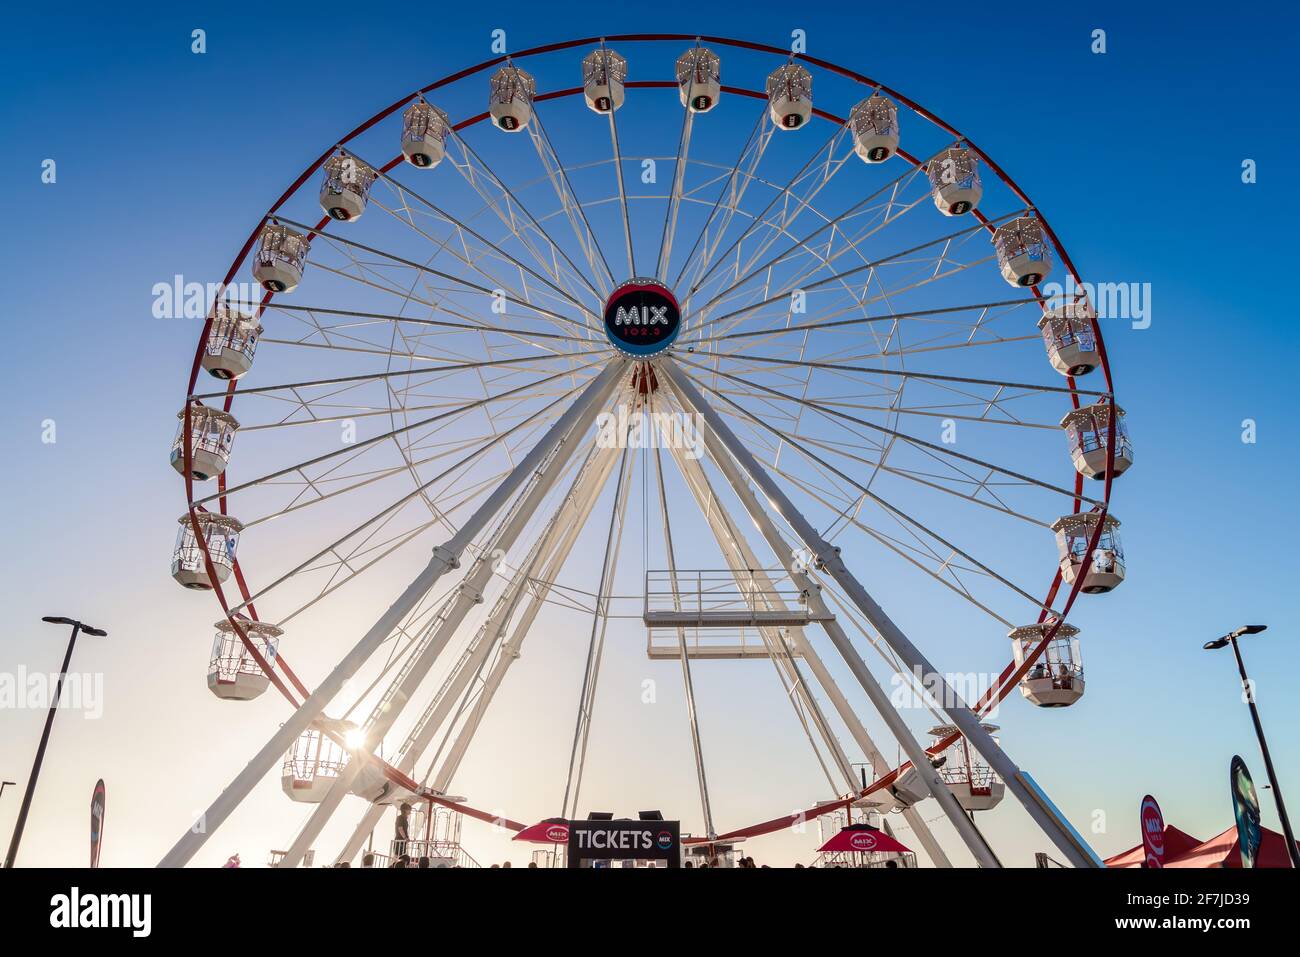 Adelaide, South Australia - January 12, 2019: Glenelg Mix102.3 Giant Ferris Wheel viewed from the Moseley Square on a bright summer day Stock Photo